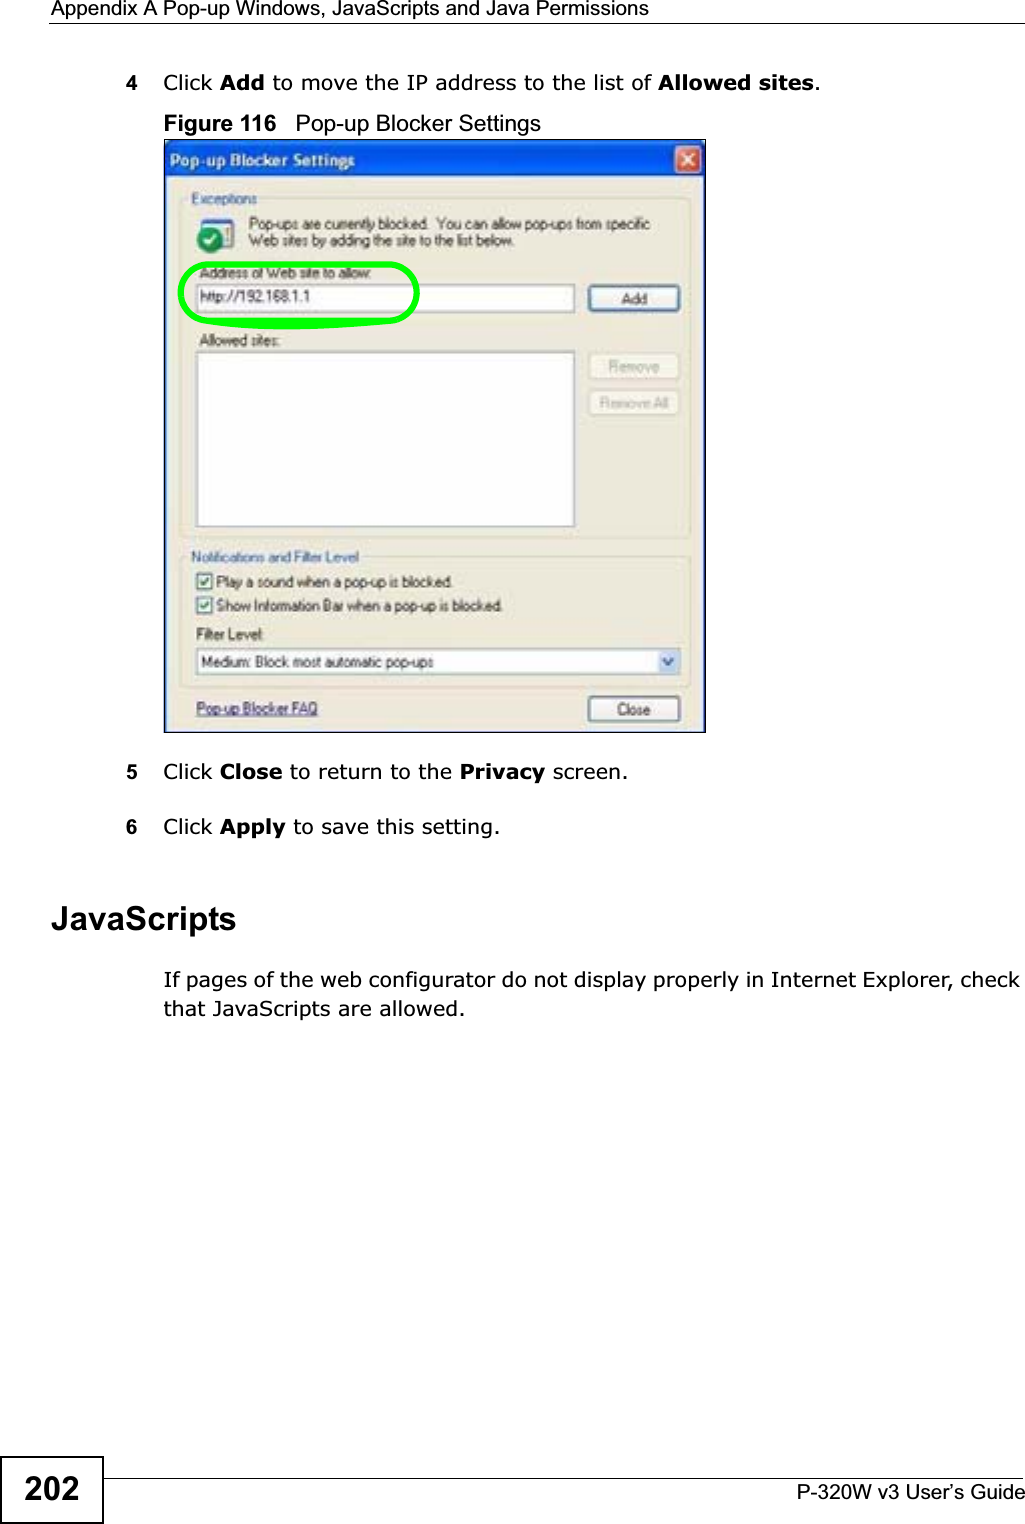 Appendix A Pop-up Windows, JavaScripts and Java PermissionsP-320W v3 User’s Guide2024Click Add to move the IP address to the list of Allowed sites.Figure 116   Pop-up Blocker Settings5Click Close to return to the Privacy screen. 6Click Apply to save this setting. JavaScriptsIf pages of the web configurator do not display properly in Internet Explorer, check that JavaScripts are allowed. 